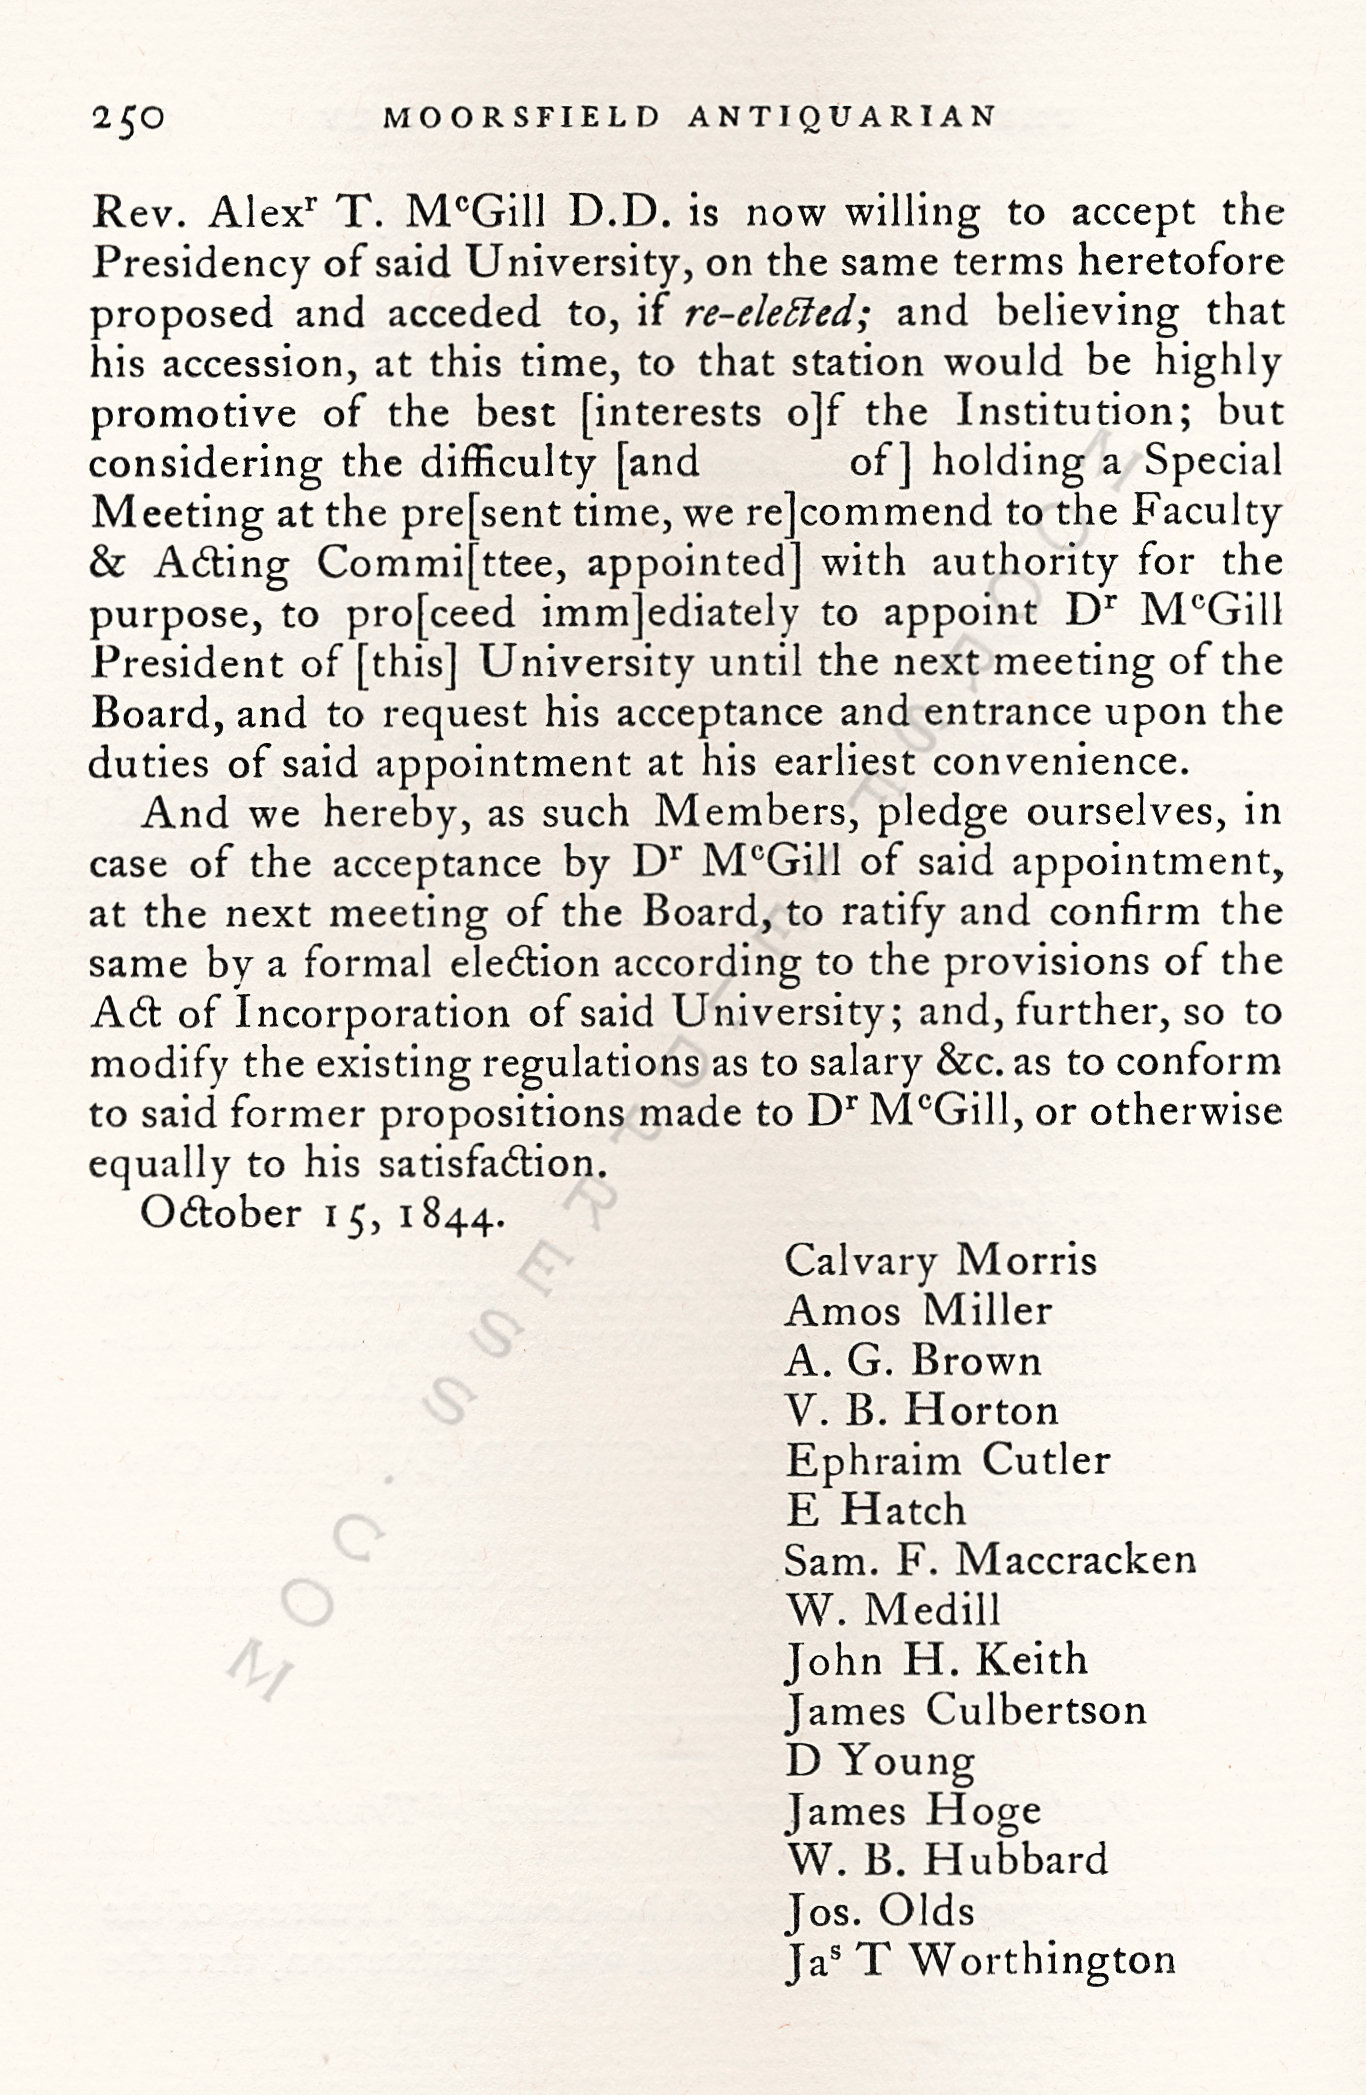 McGill
                      Papers-The Crisis at Ohio University Following the
                      Resignation of President McGuffey 1843-1848